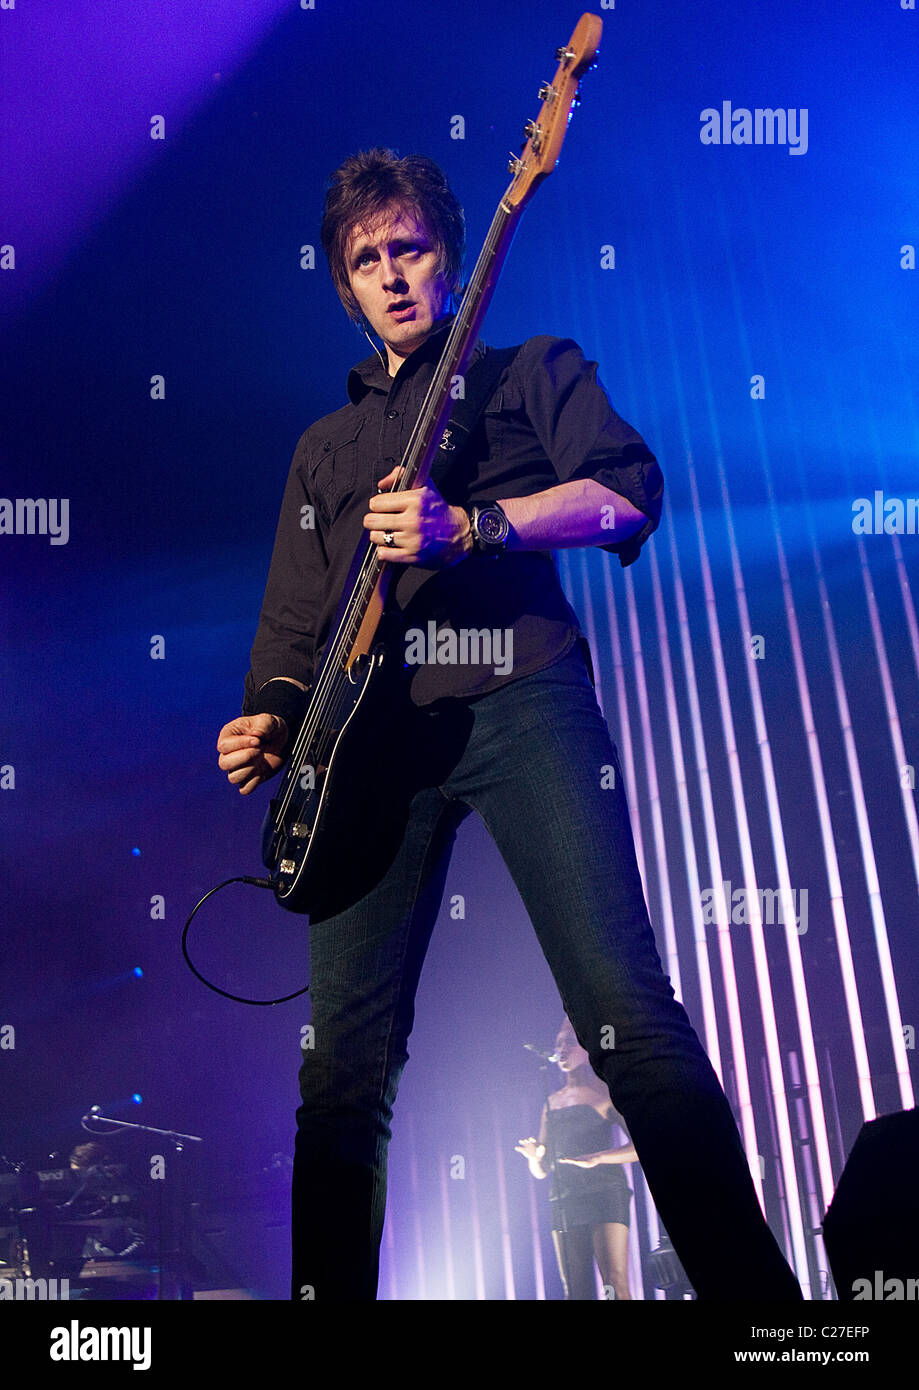 Eddie Duffy of Simple Minds in at Manchester MEN Manchester, - 03.12.09 Sakura Stock Photo - Alamy